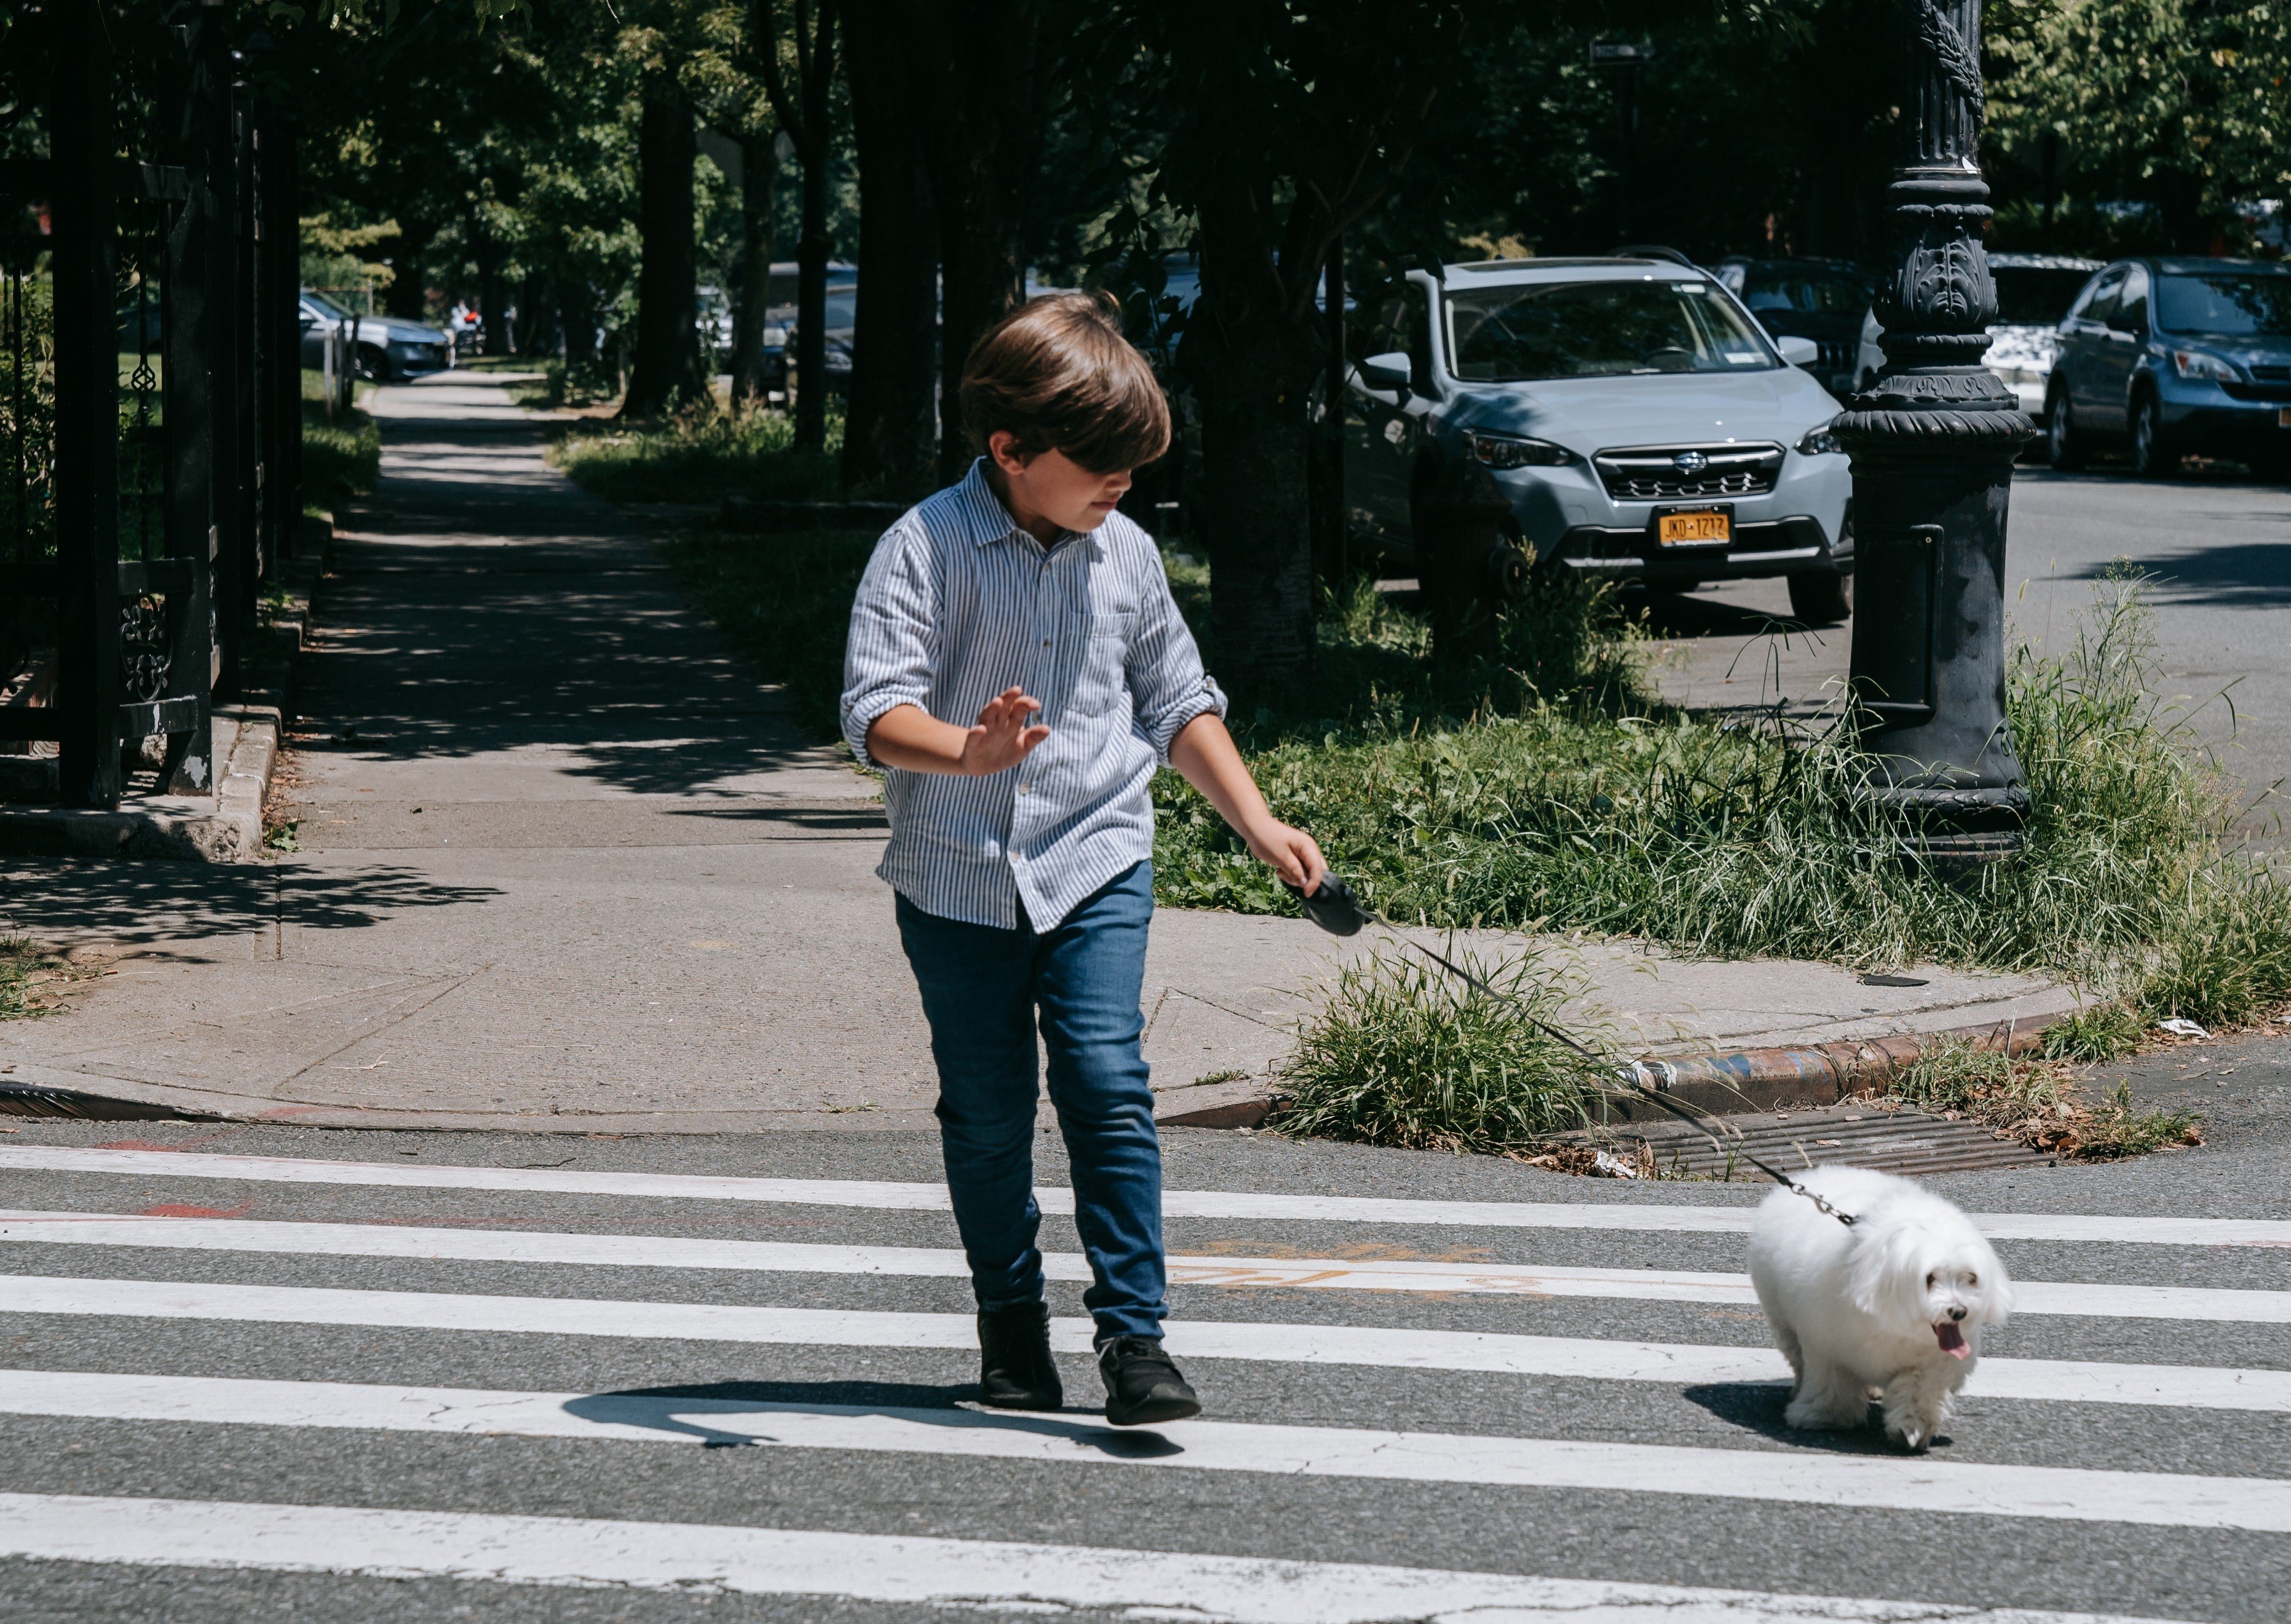 The boy walked dogs, mowed lawns & did other petty gigs to save the money to buy the toys. | Source: Pexels